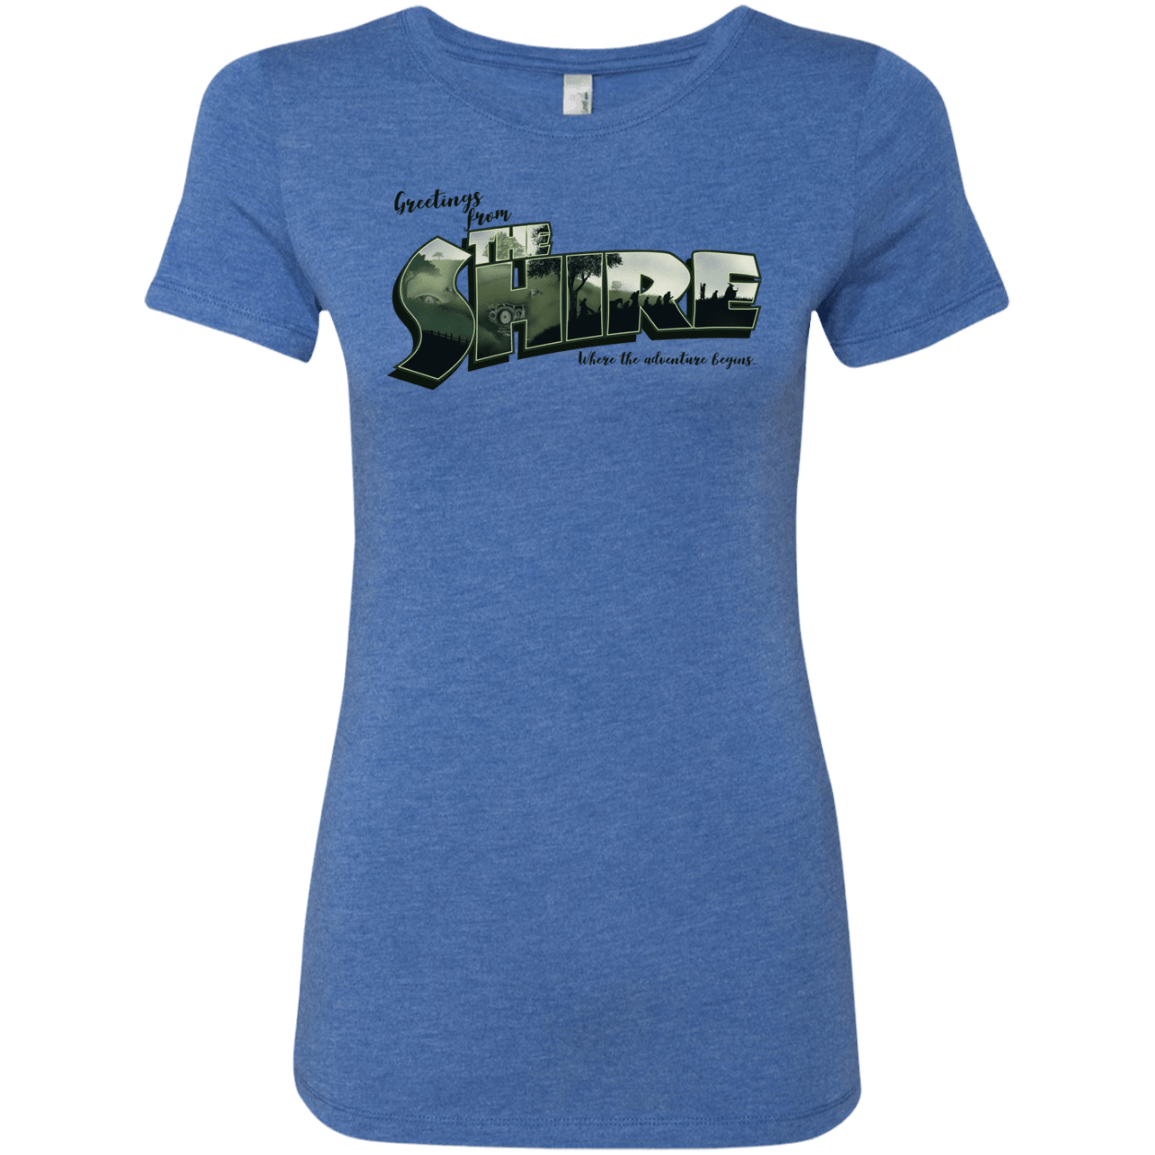 T-Shirts Vintage Royal / S Greetings from the Shire Women's Triblend T-Shirt